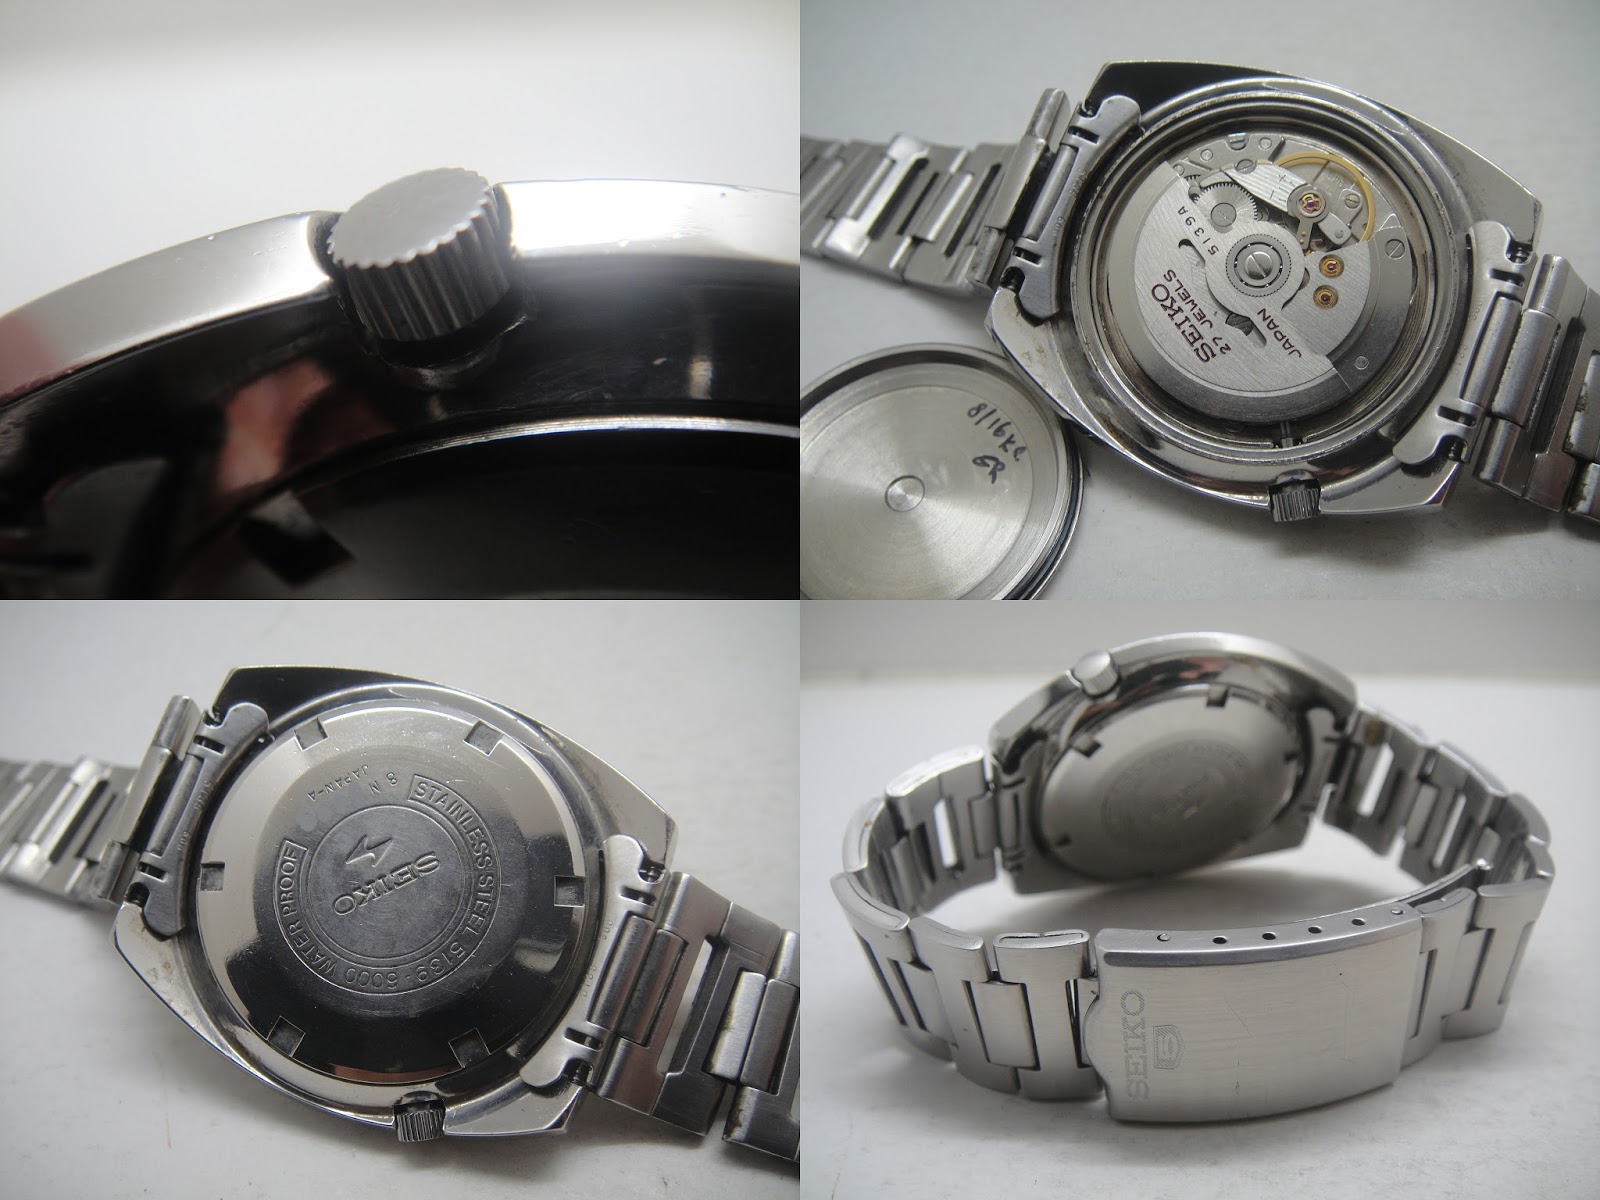 Antique Watch Bar: SEIKO 5 DX AUTOMATIC 5139-6000 S5A81 (SOLD)